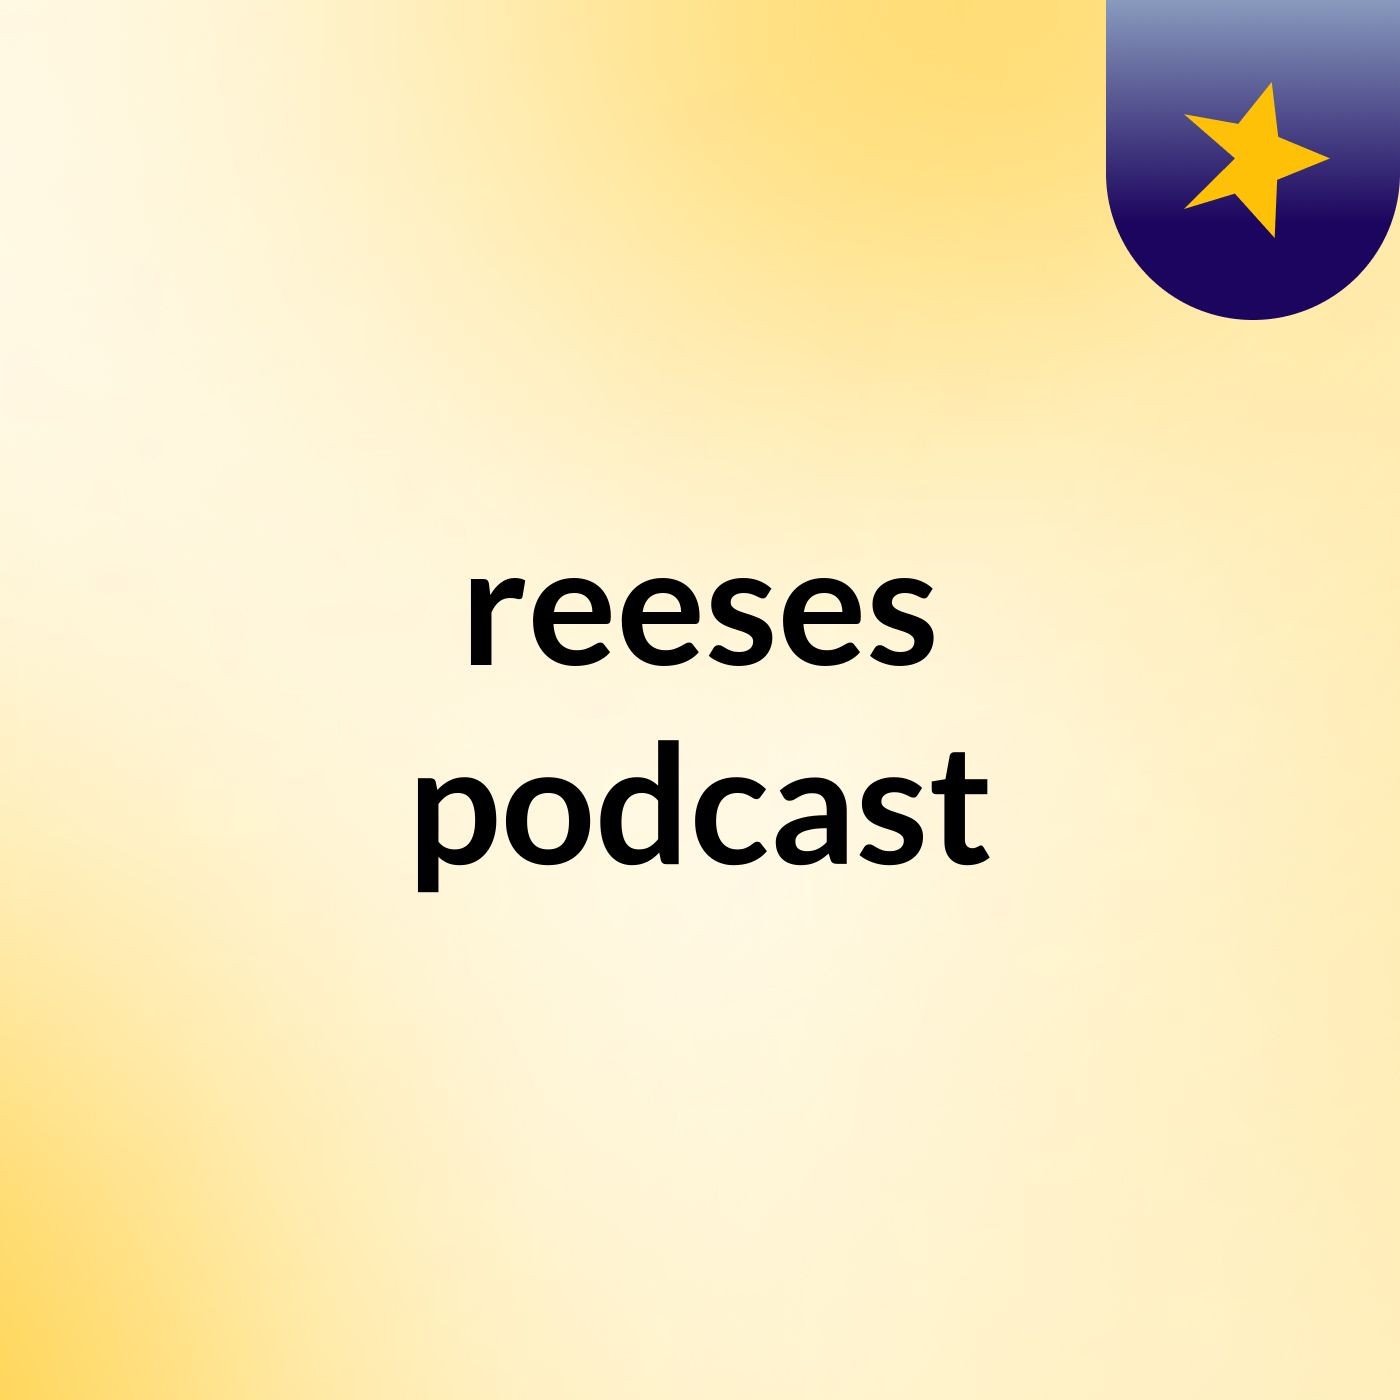 reeses podcast